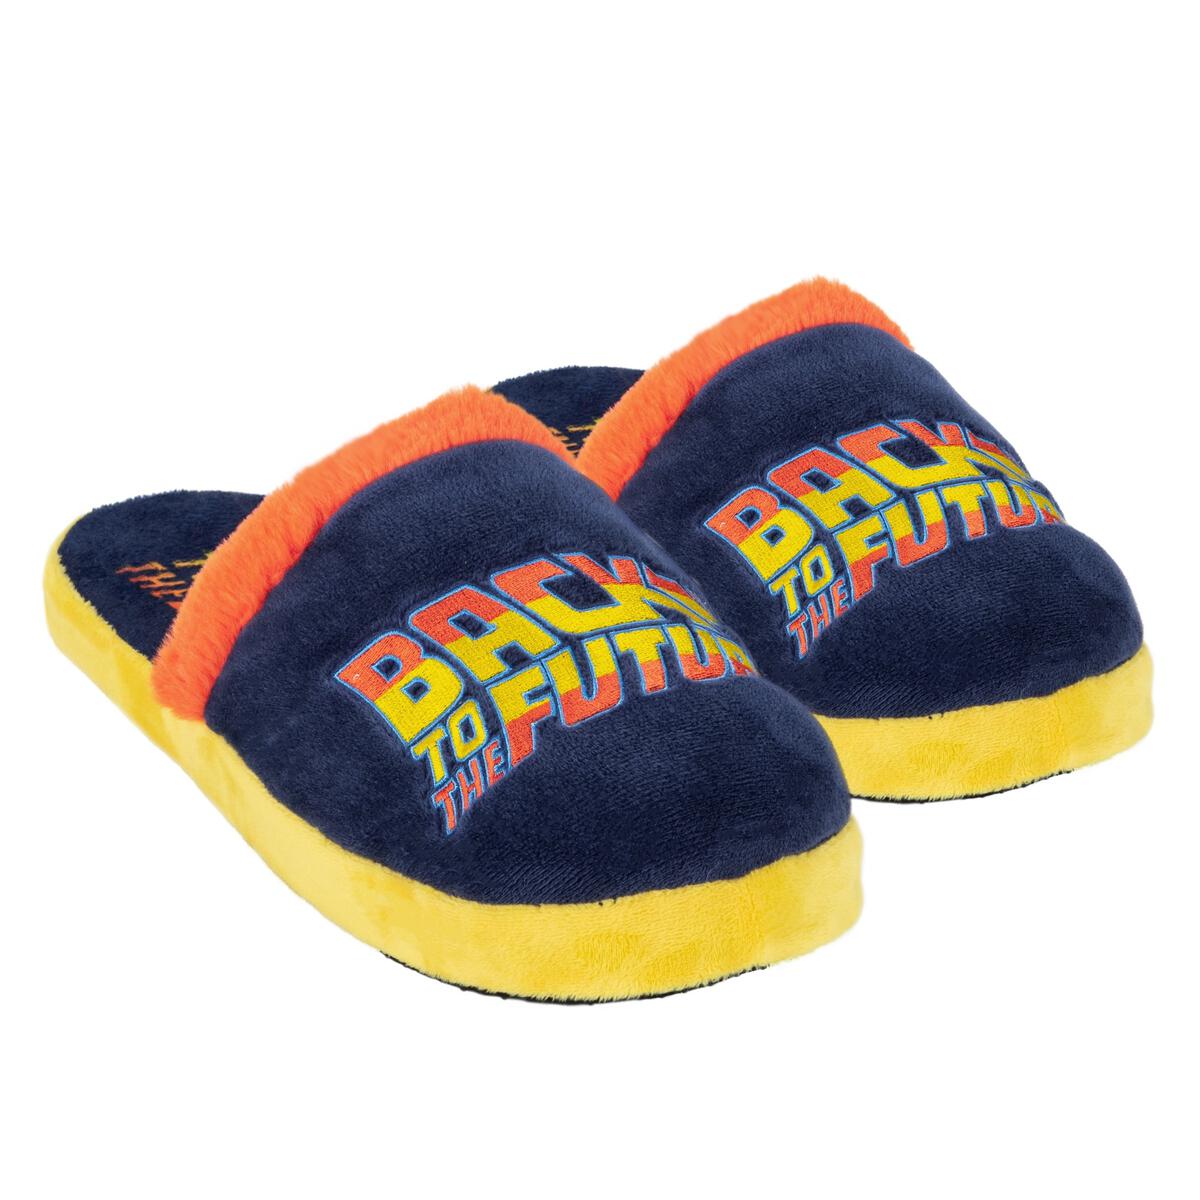 Odd Sox Back To The Future Slippers Adult Blue 34434-FSL